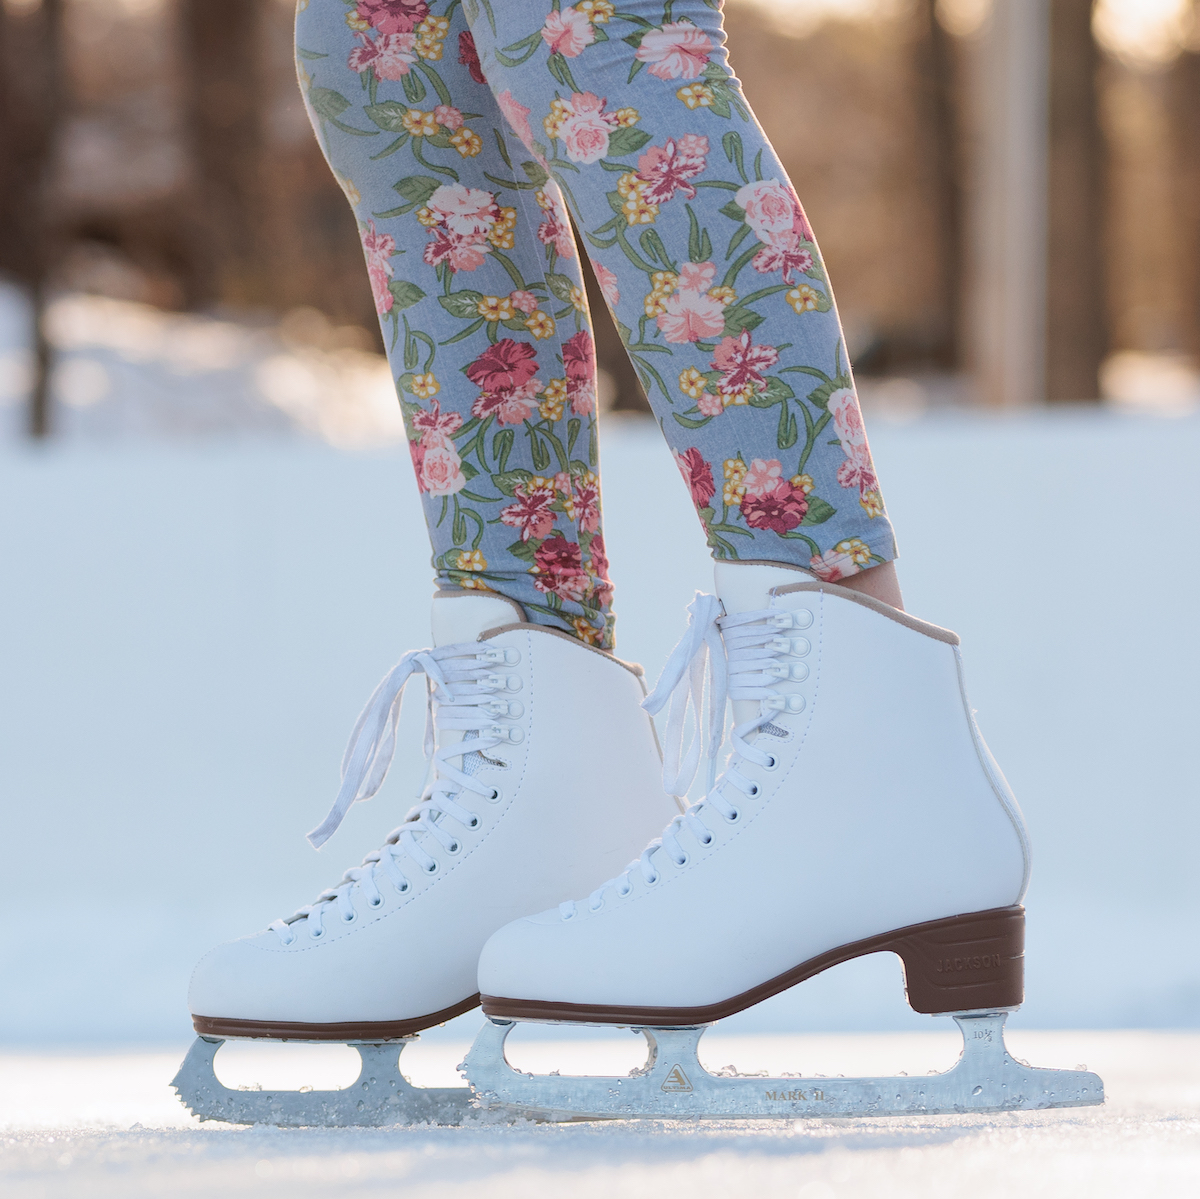 An image of an ice skater.